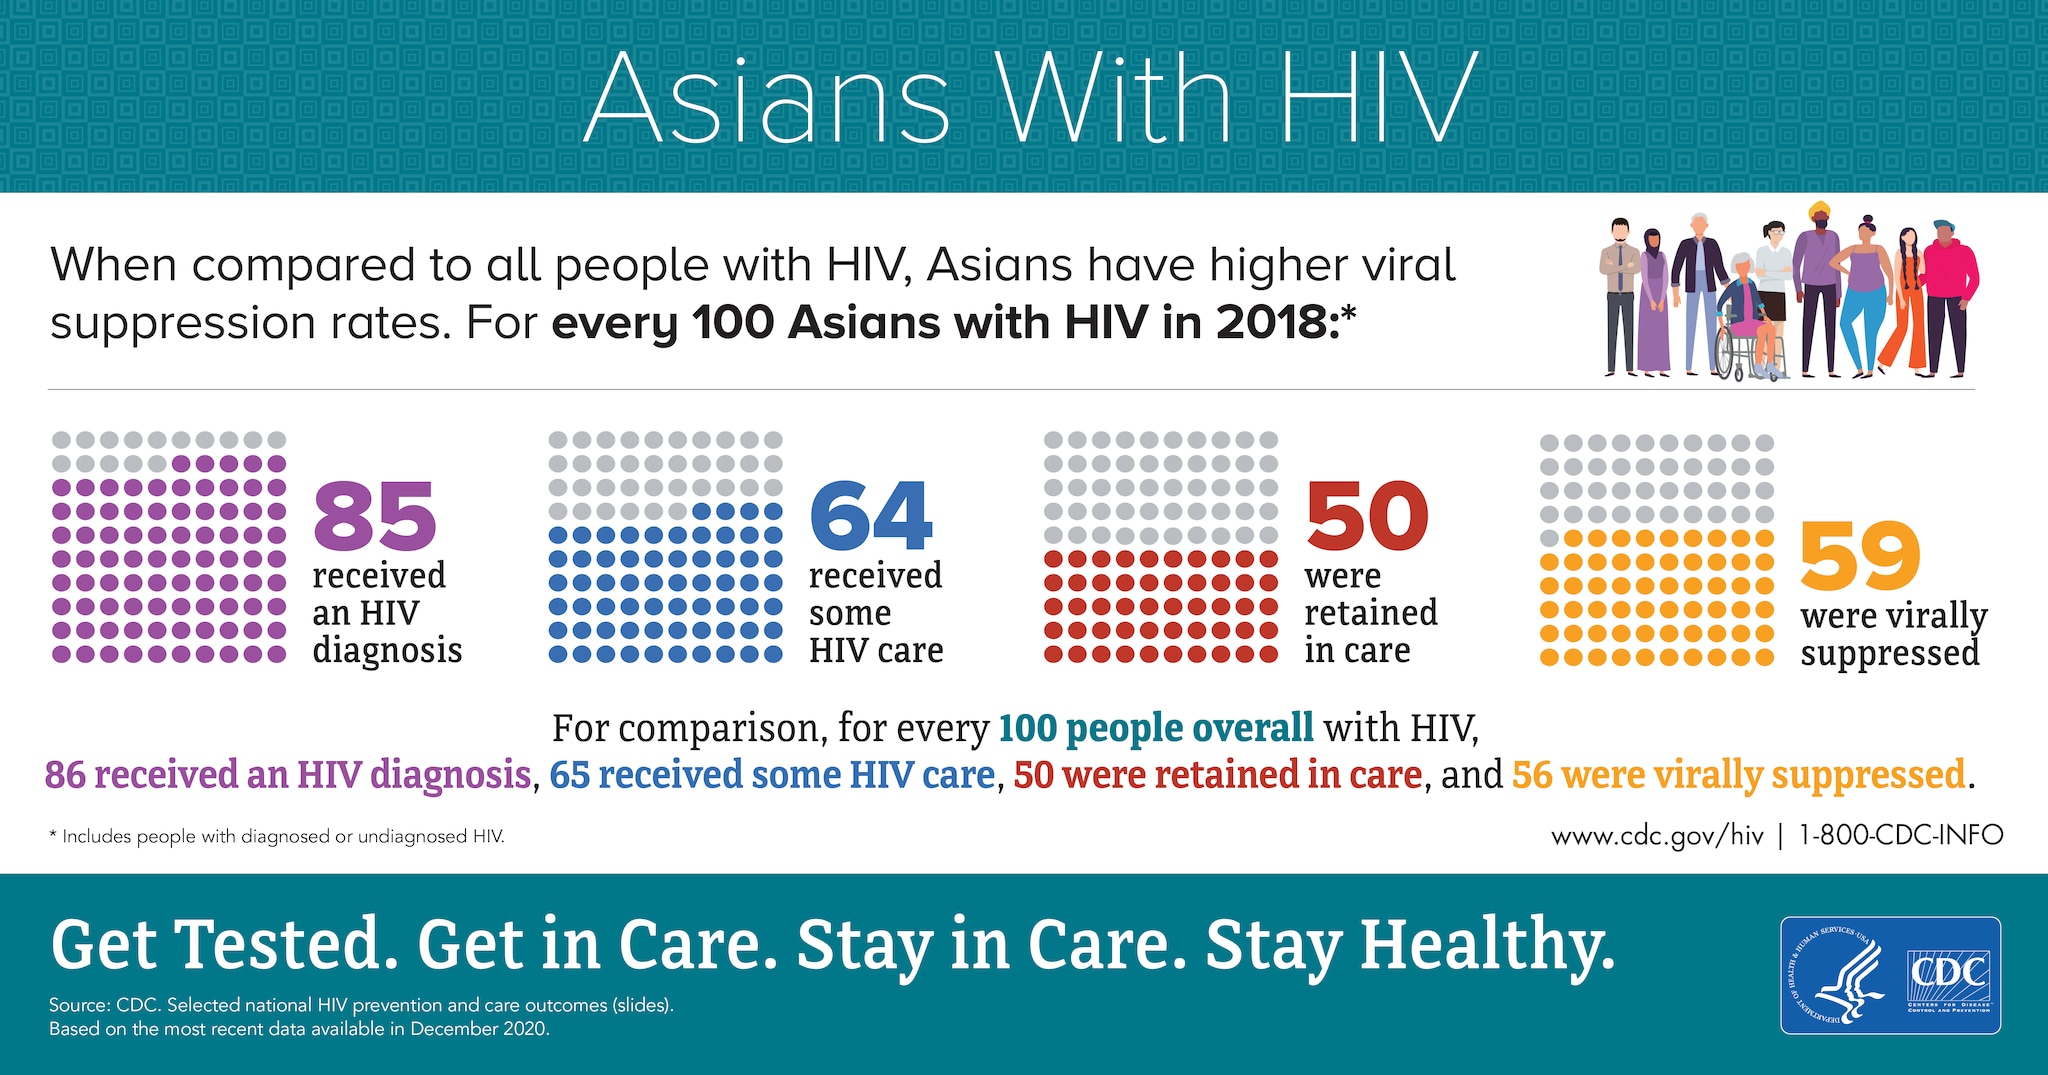 Infographic title is Asians with HIV. A group image is to the right of the infographic. When compared to all people with HIV, Asians have higher viral suppression rates. For every 100 Asians with HIV in 2018: 85 received an HIV diagnosis, 64 received some HIV care, 50 were retained in care, and 59 were virally suppressed. For comparison, for every 100 people overall with HIV, 86 received an HIV diagnosis, 65 received some HIV care, 50 were retained in care, and 56 were virally suppressed. Get tested. Get in care. Stay in care. Stay healthy.